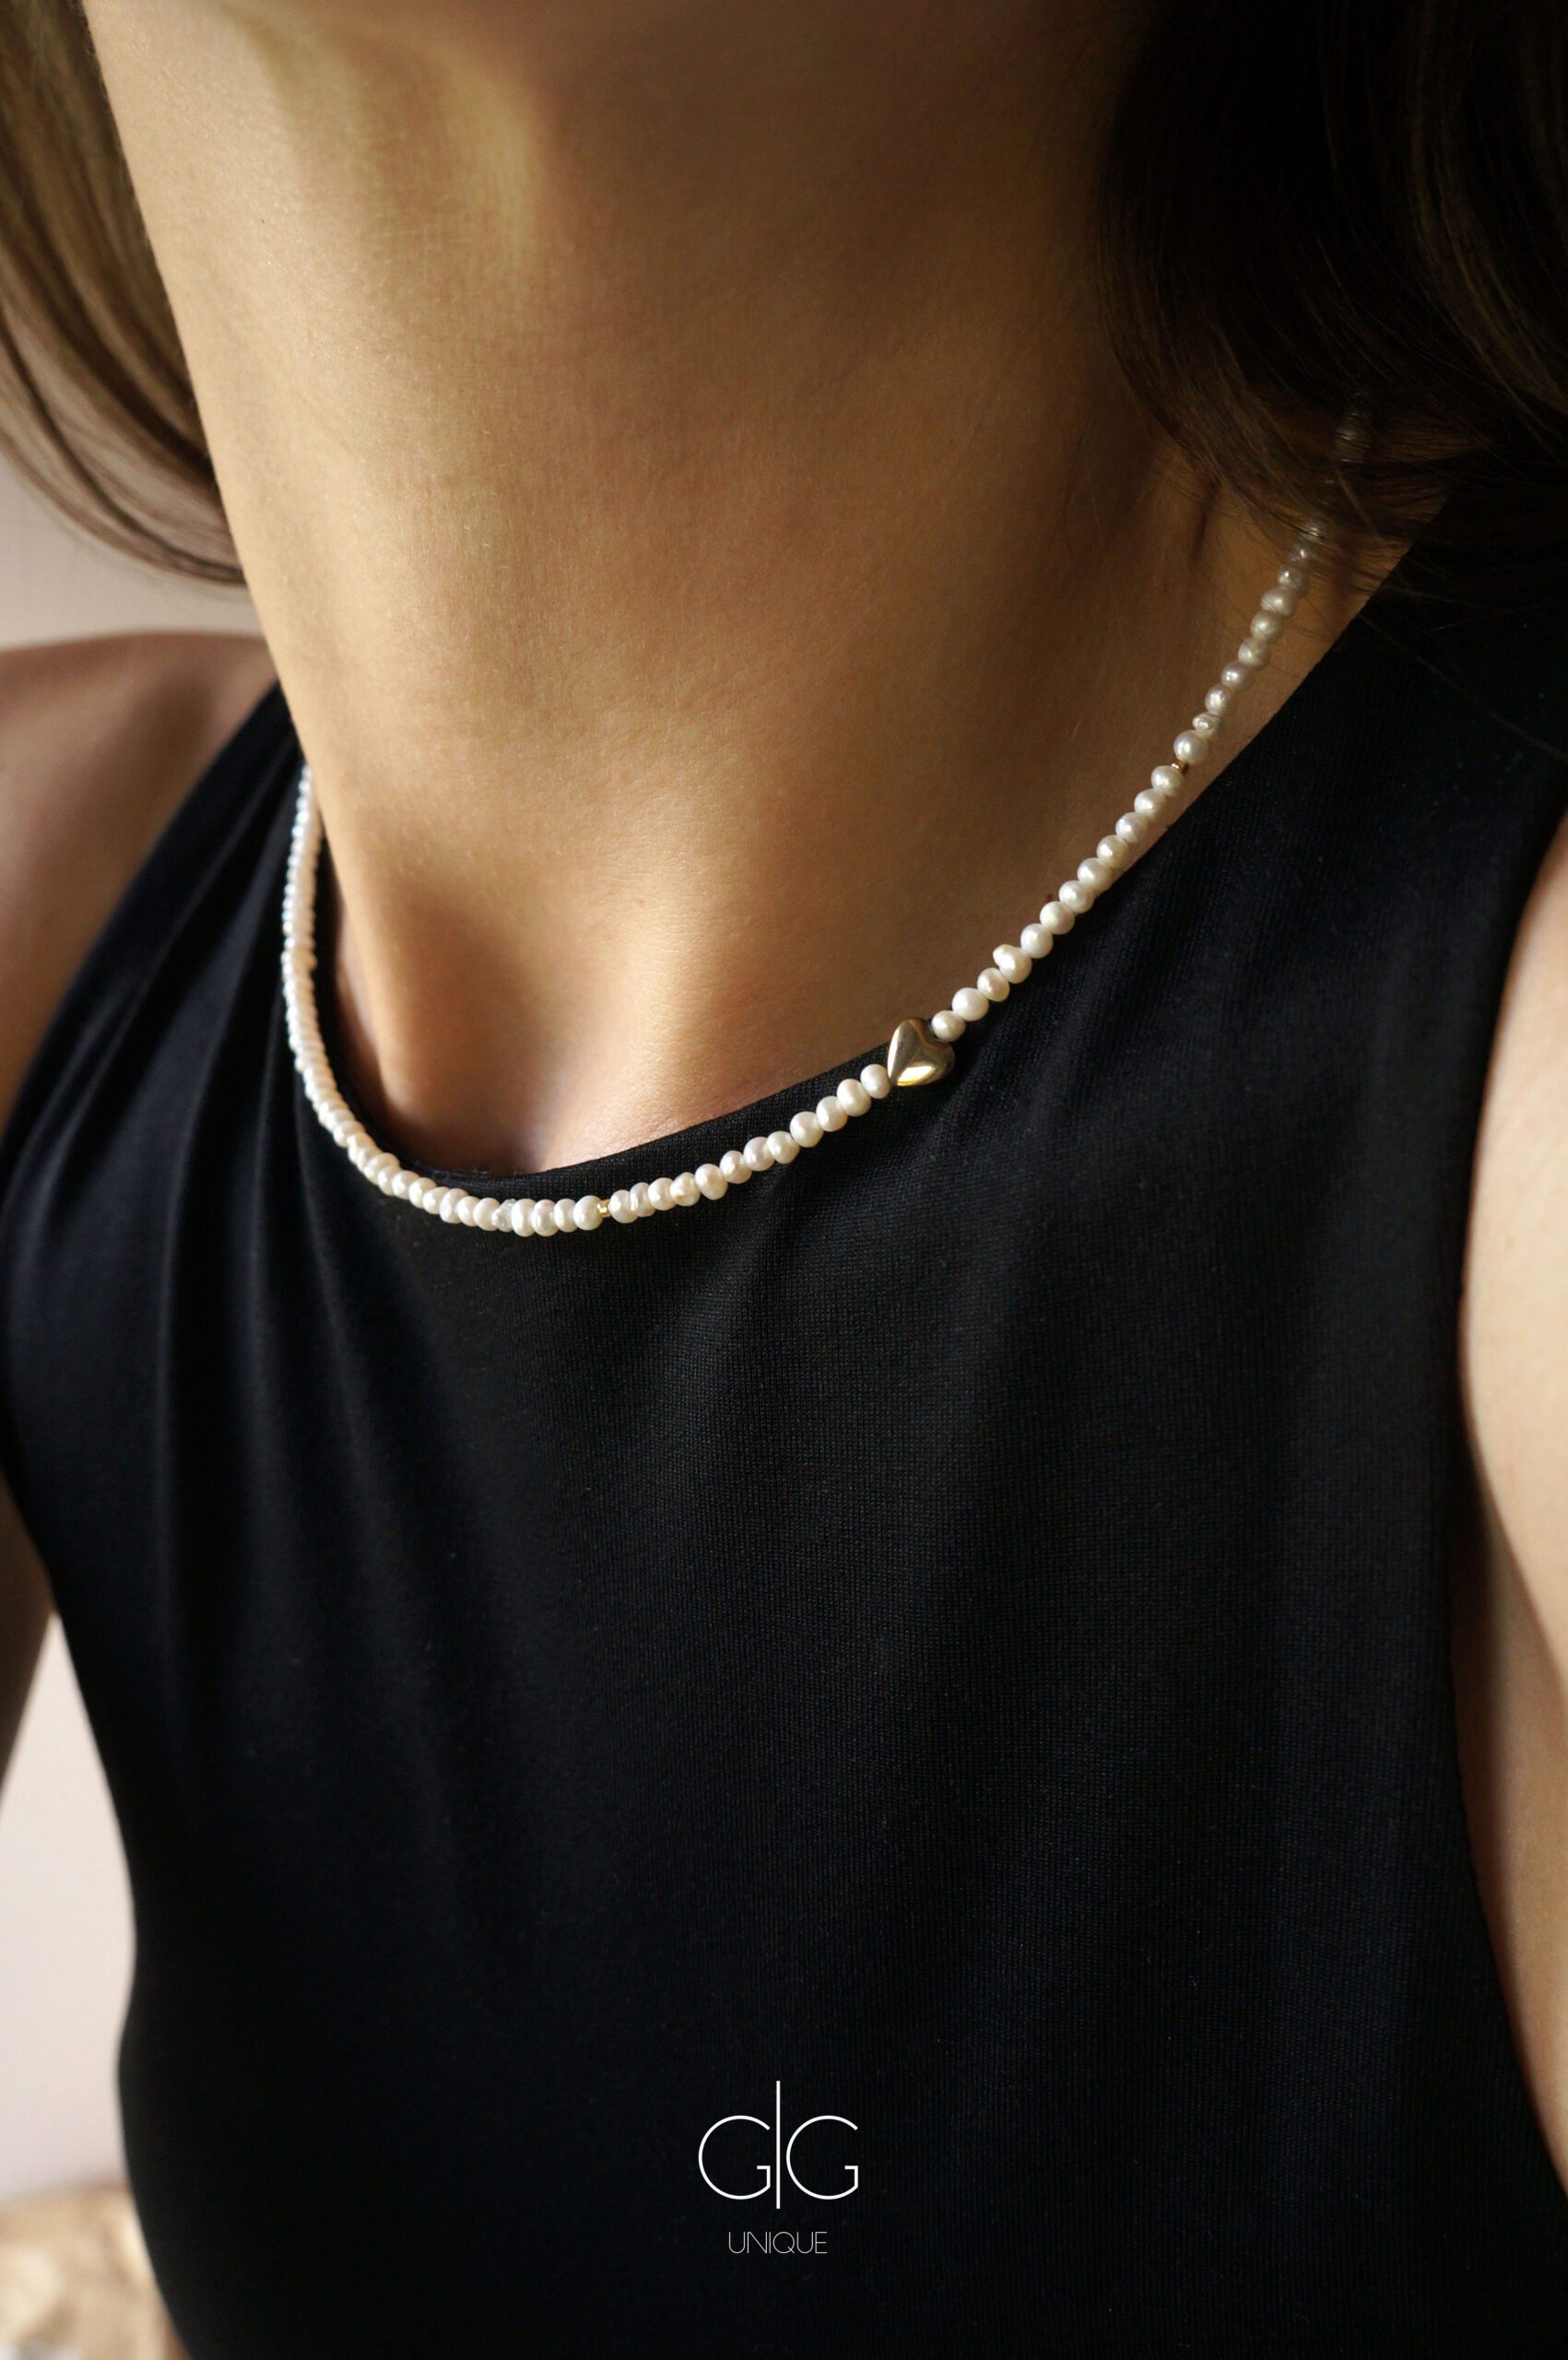 Small pearl necklace with a silver heart